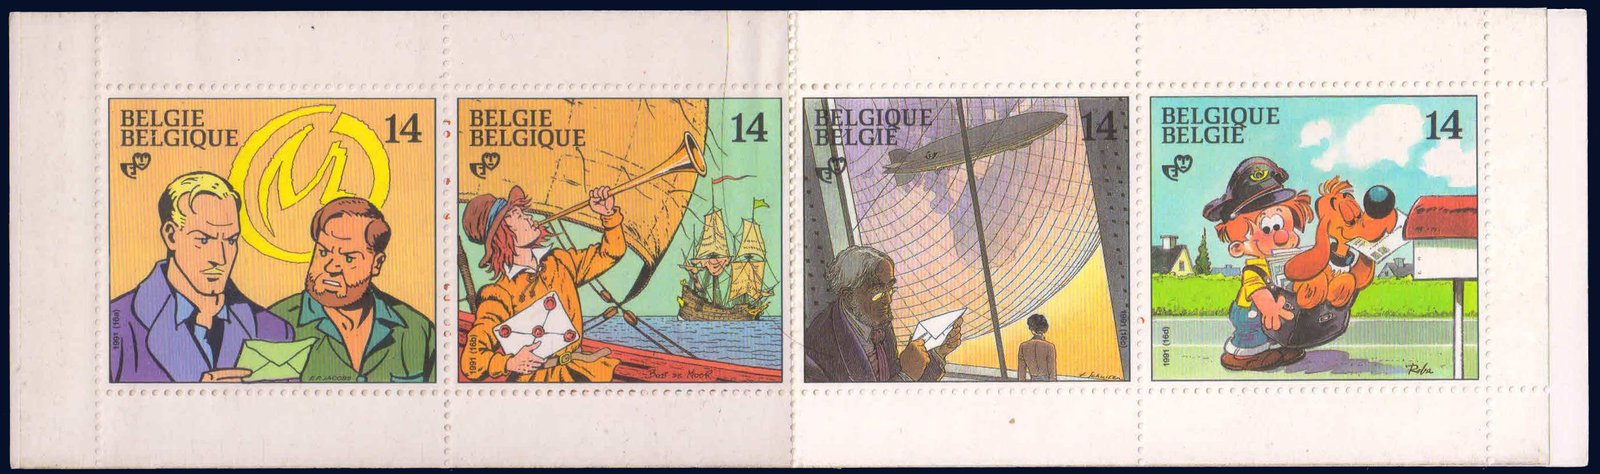 BELGIUM 1991-Comic Strips, The Yellow Mark, The Ill Fated Voyage, Cities of the Fantastic, Boule & Bill, Strip of 4, MNH, S.G. 3090-3093-Cat £ 10-